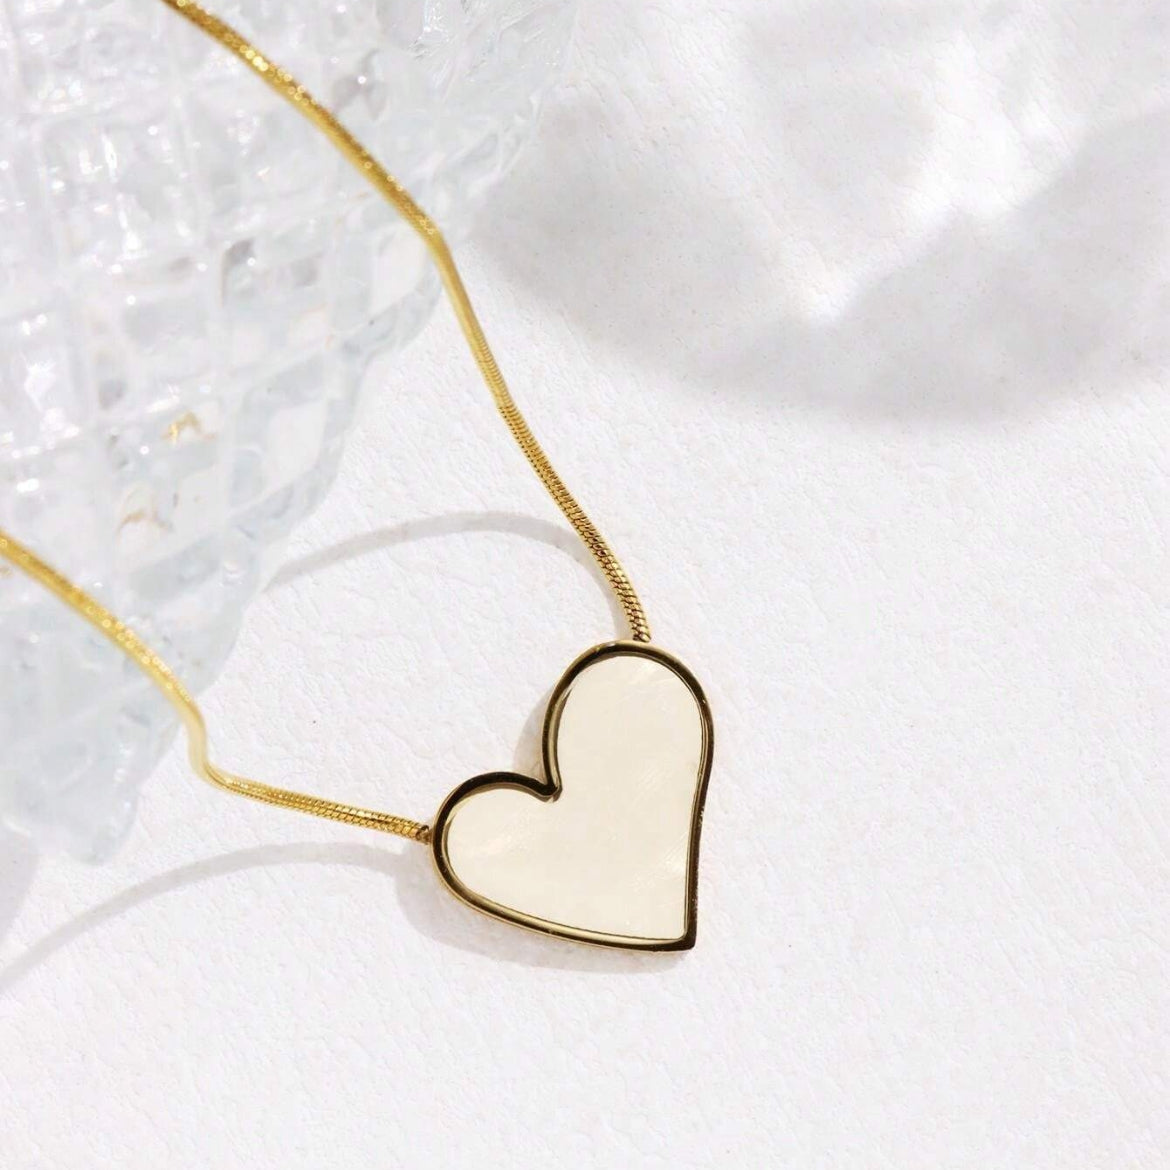 Stainless Steel Heart Shape Pendant Necklace